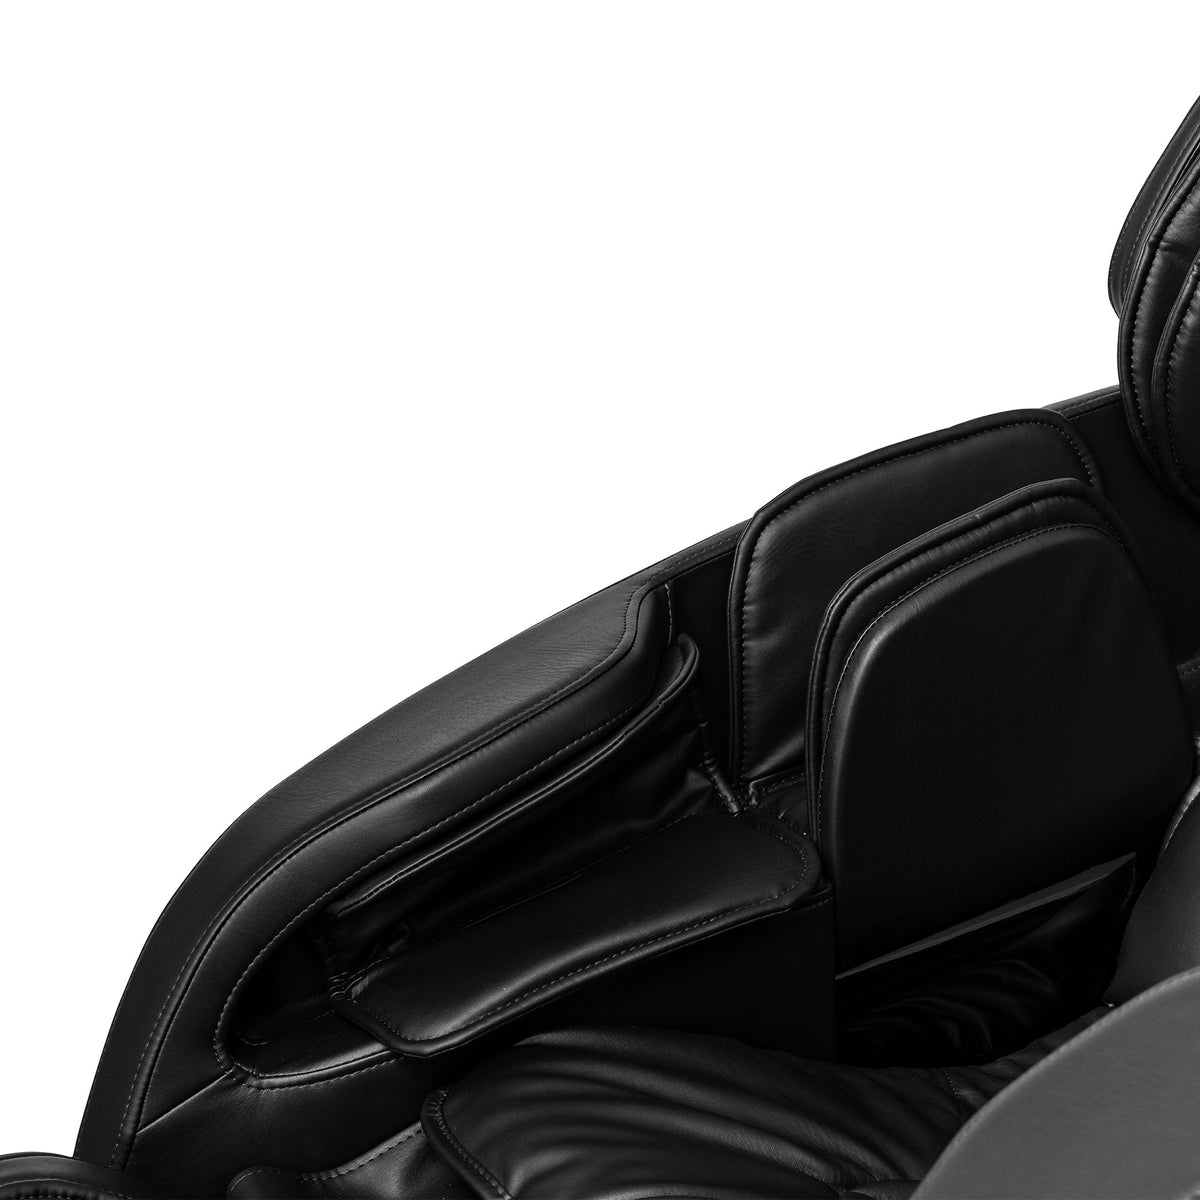 Close-up of the inside of the side panel of a Black Inner Balance Wellness Jin 2.0 Massage Chair with sleek design